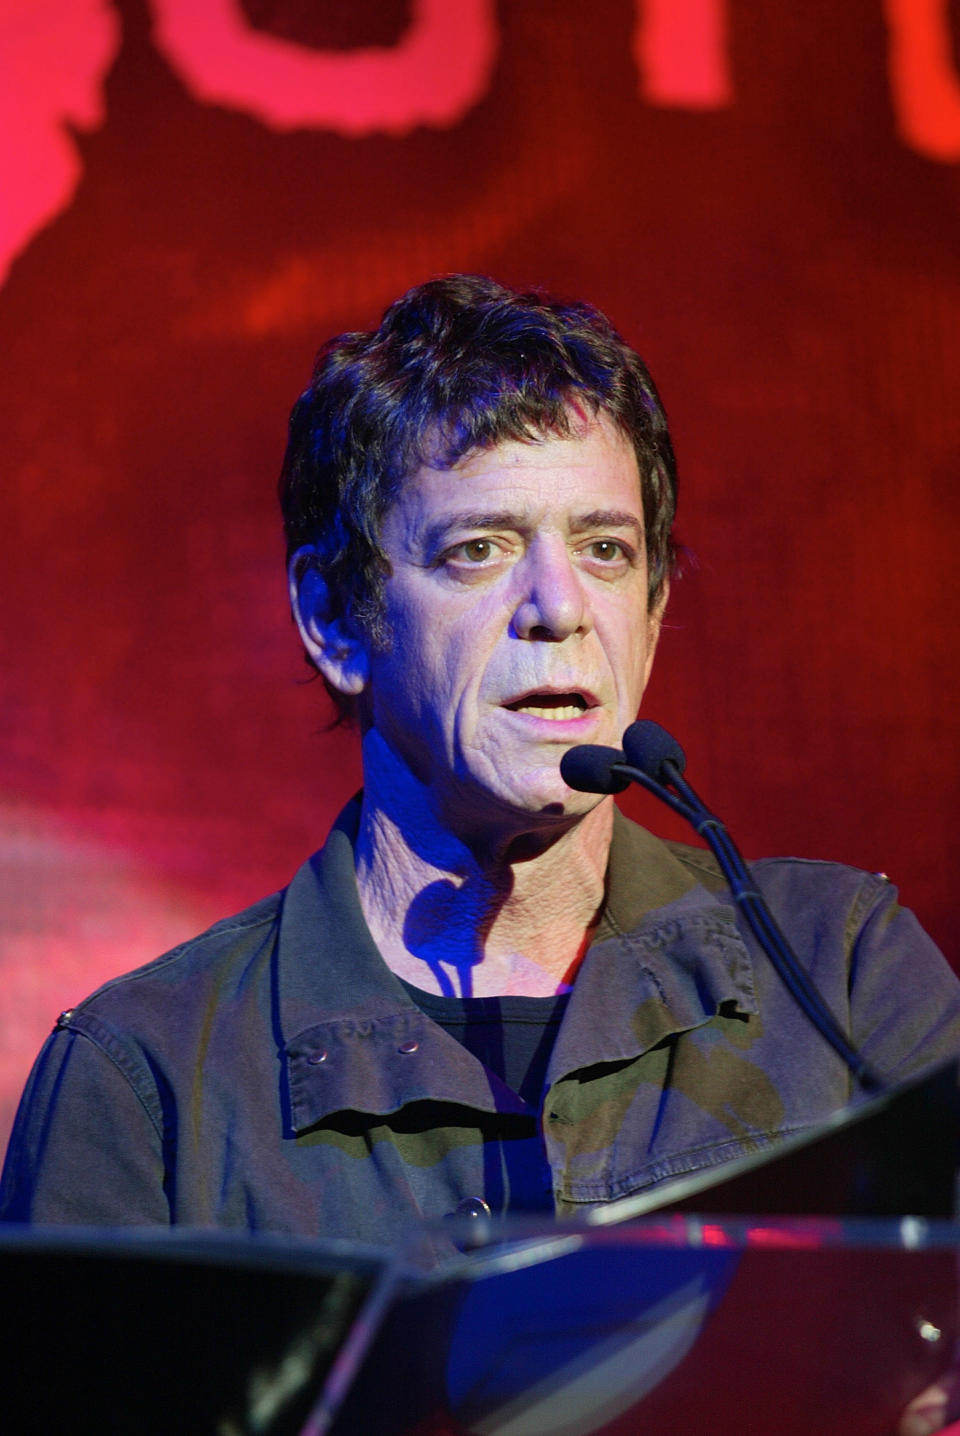 <a href="http://www.huffingtonpost.com/2013/10/27/lou-reed-dead_n_4167976.html" target="_blank">Reed died of a "liver-related ailment"</a> on Oct. 27, 2013 at the age of 71.